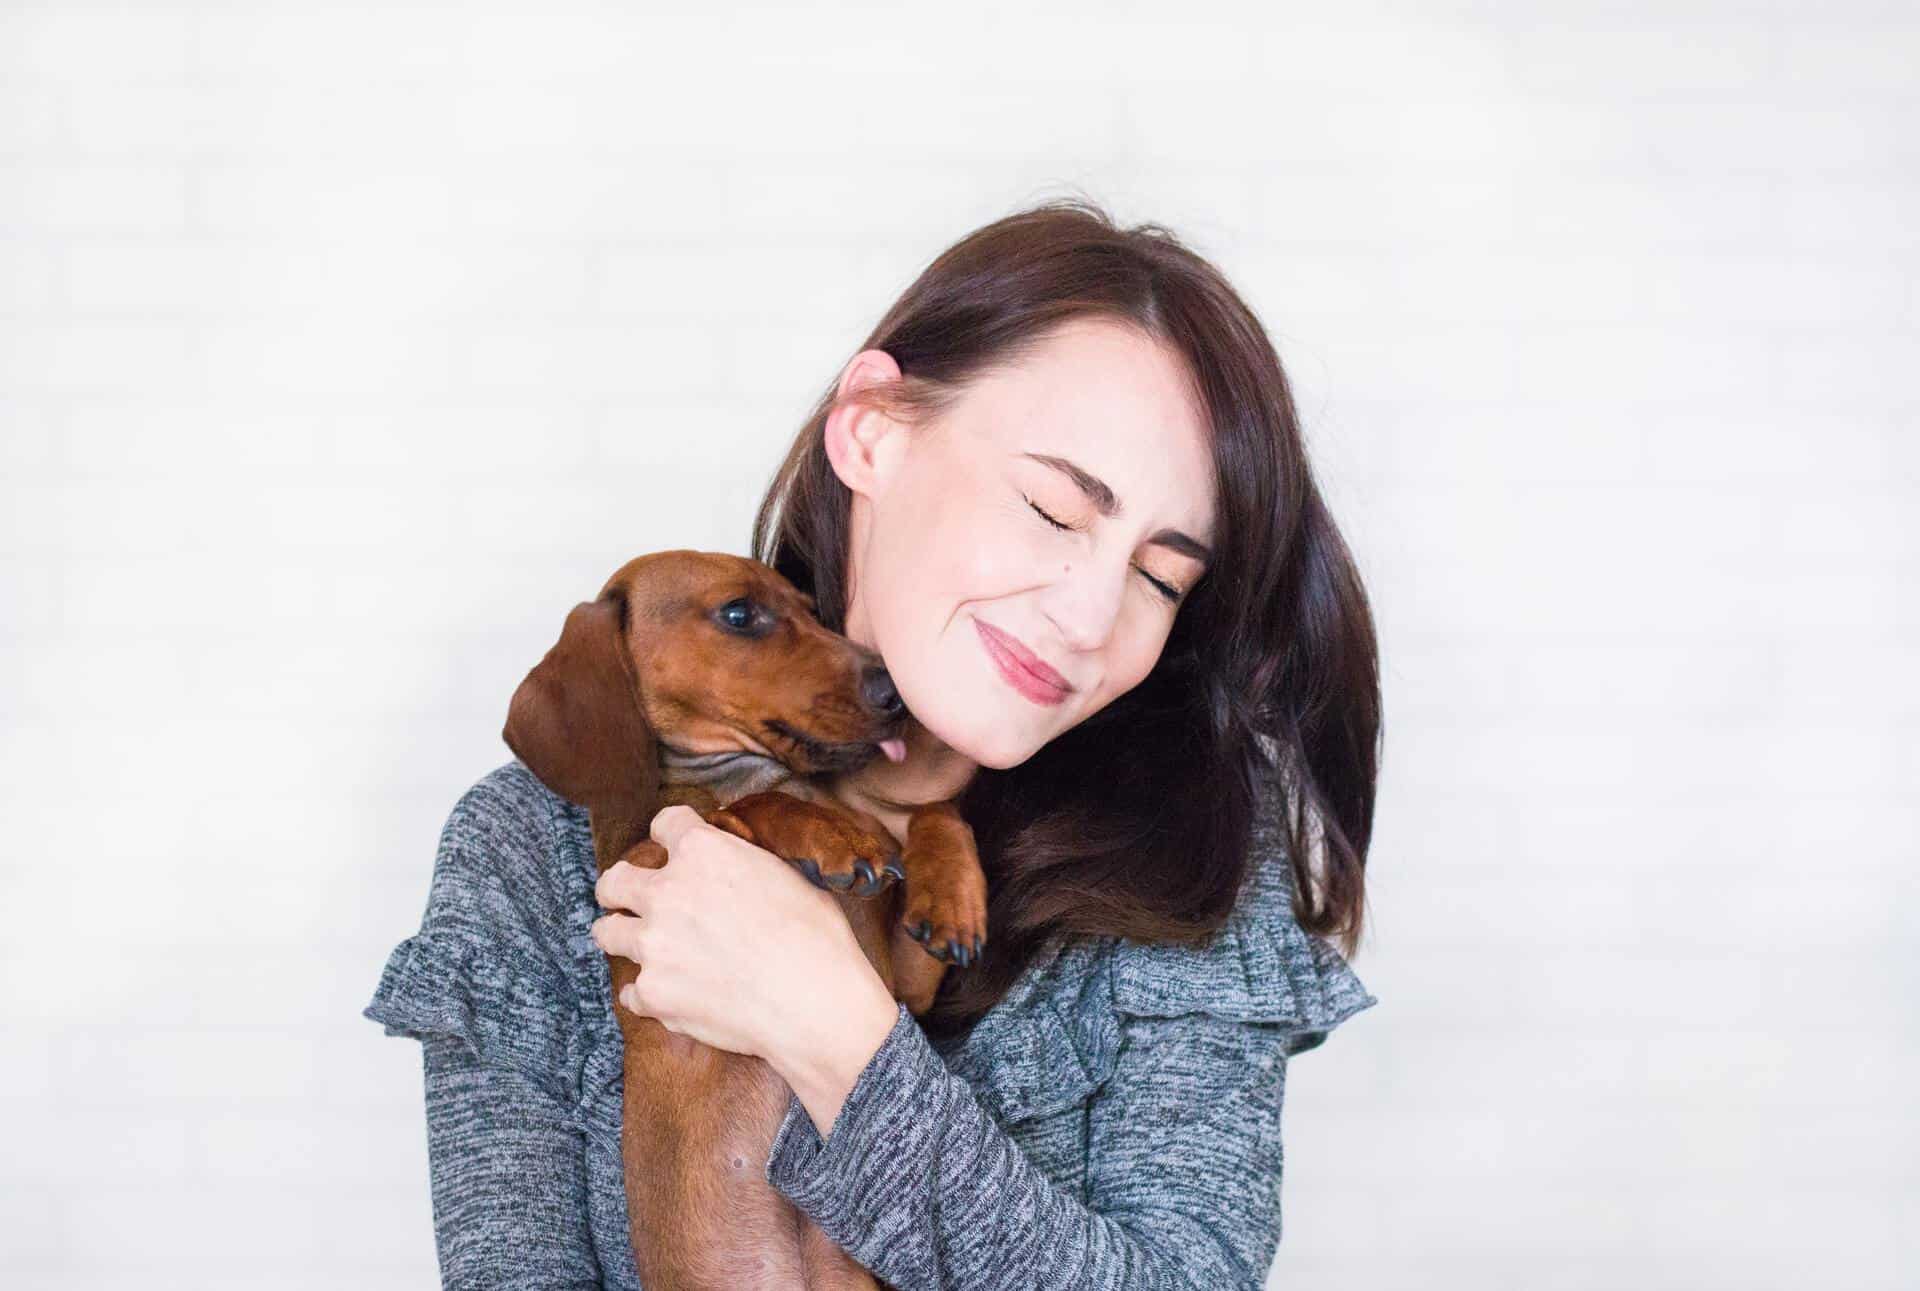 Woman holding a dog that licks her face